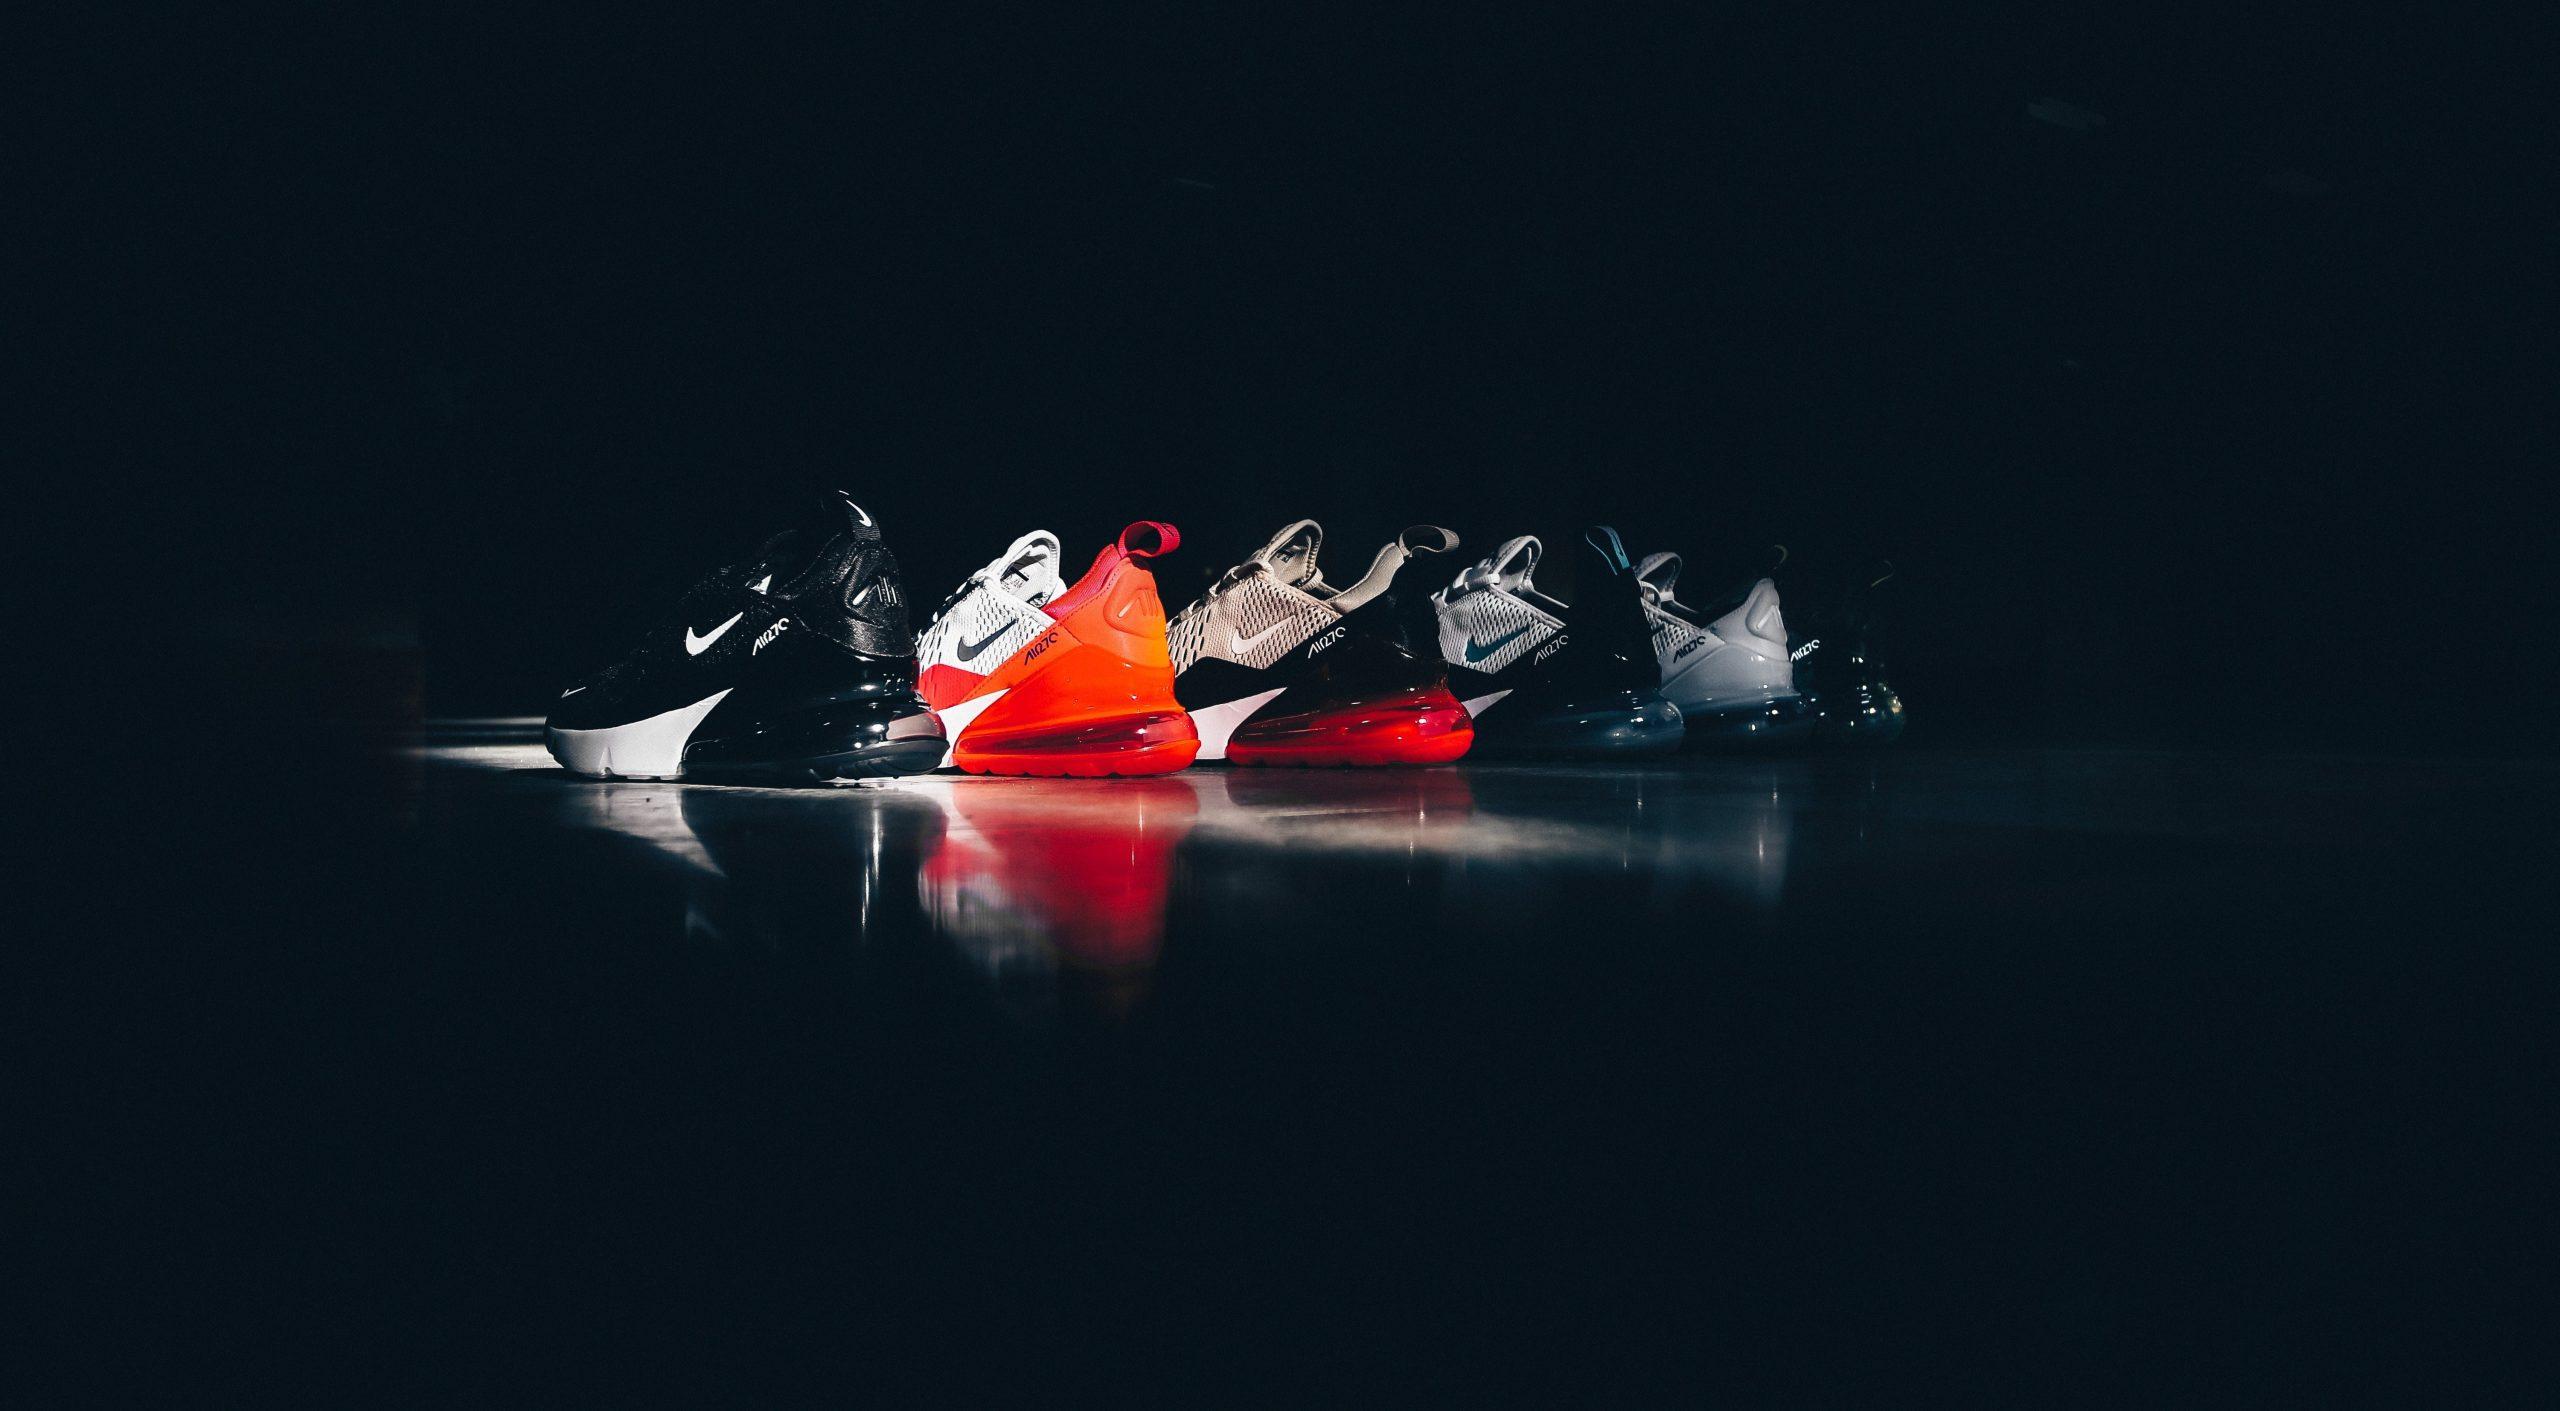 Pairs of Nike shoes against a black backdrop.